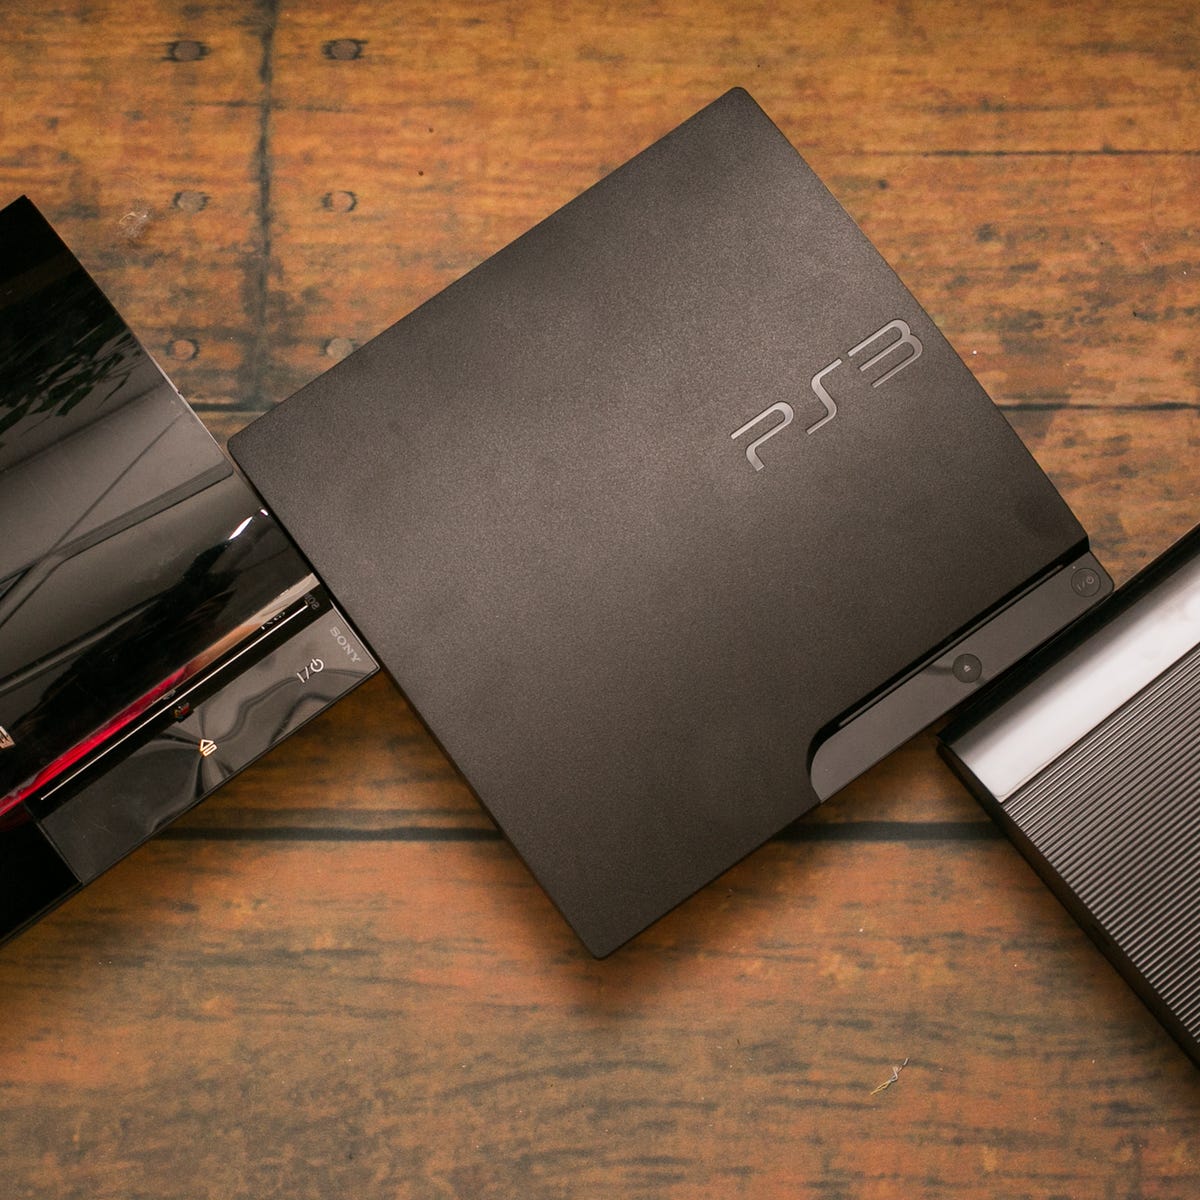 Productie thuis Leidingen Sony PlayStation 3 Super Slim review: Sony shrinks down new PS3 -- except  for the price - CNET